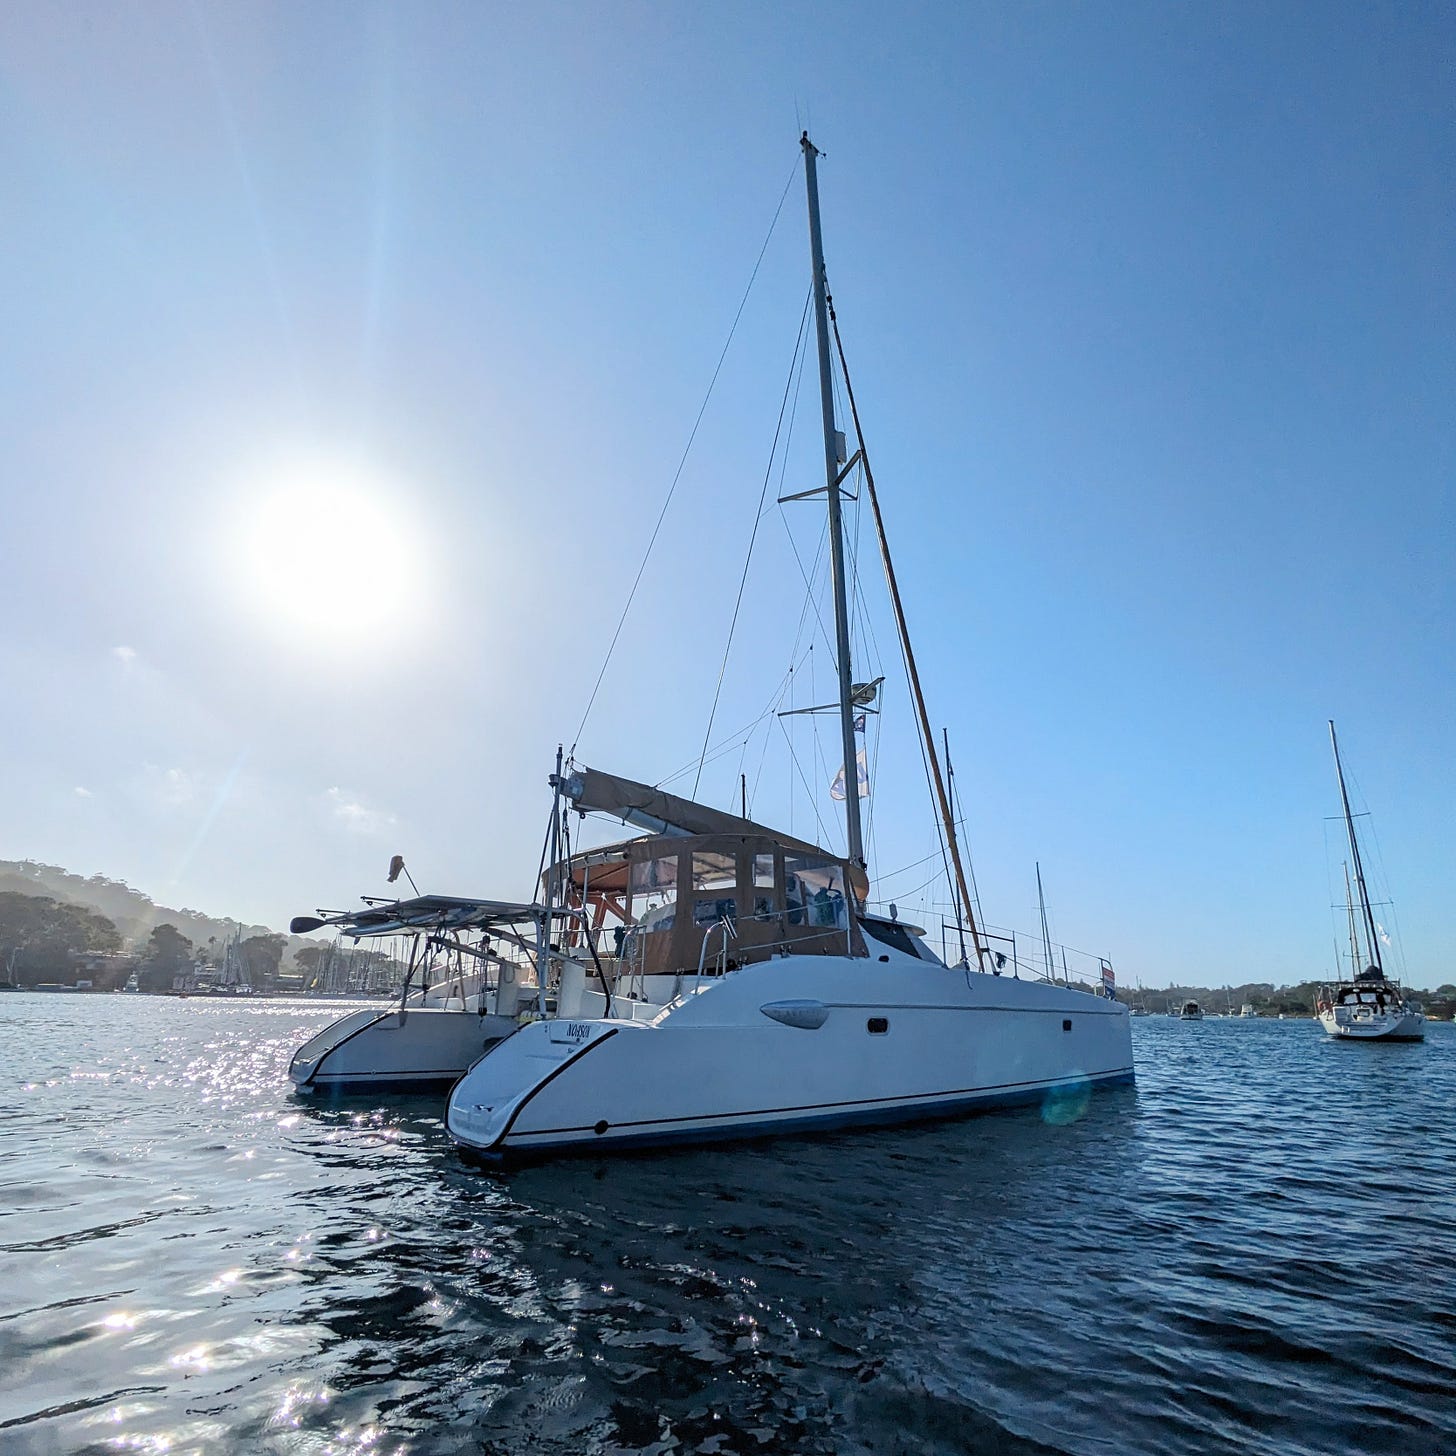 a 40-foot catamaran in a harbor full of boats, moored to a buoy